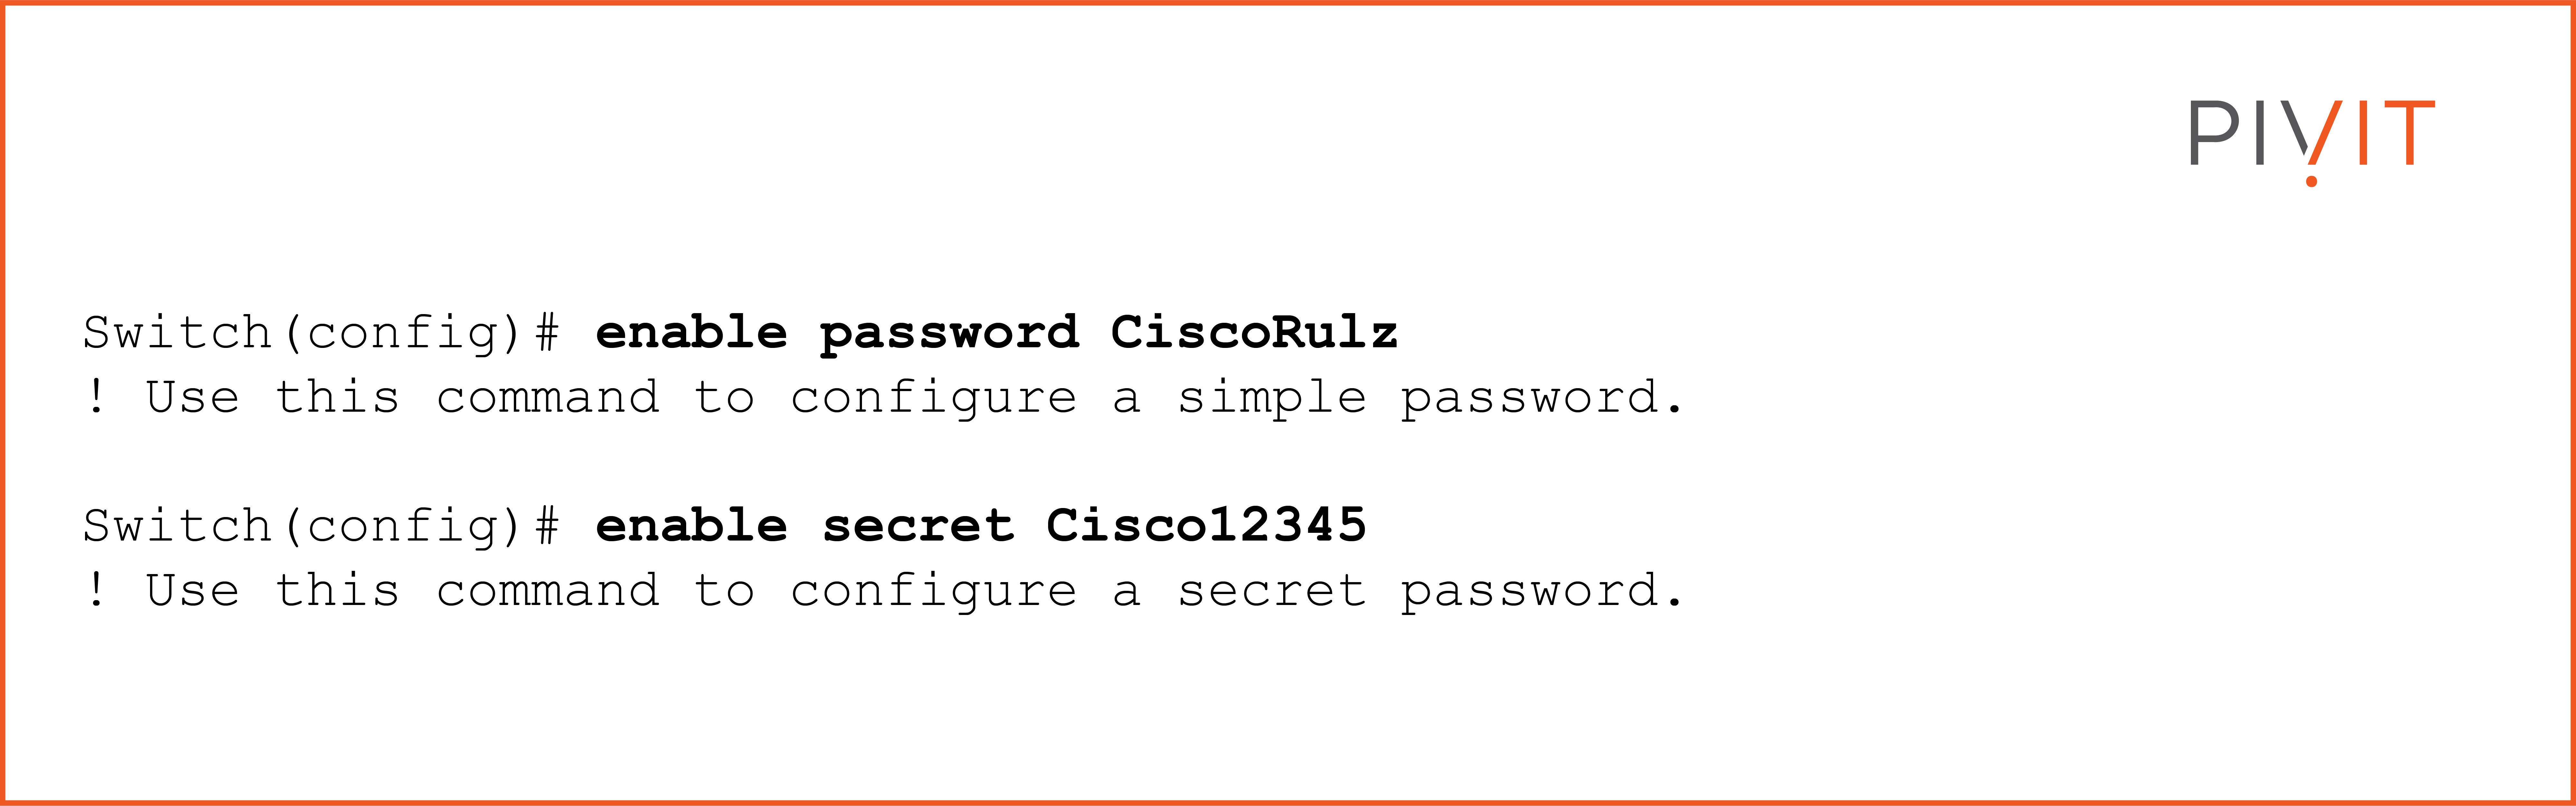 Commands to configure simple and secret passwords on a Cisco IOS device